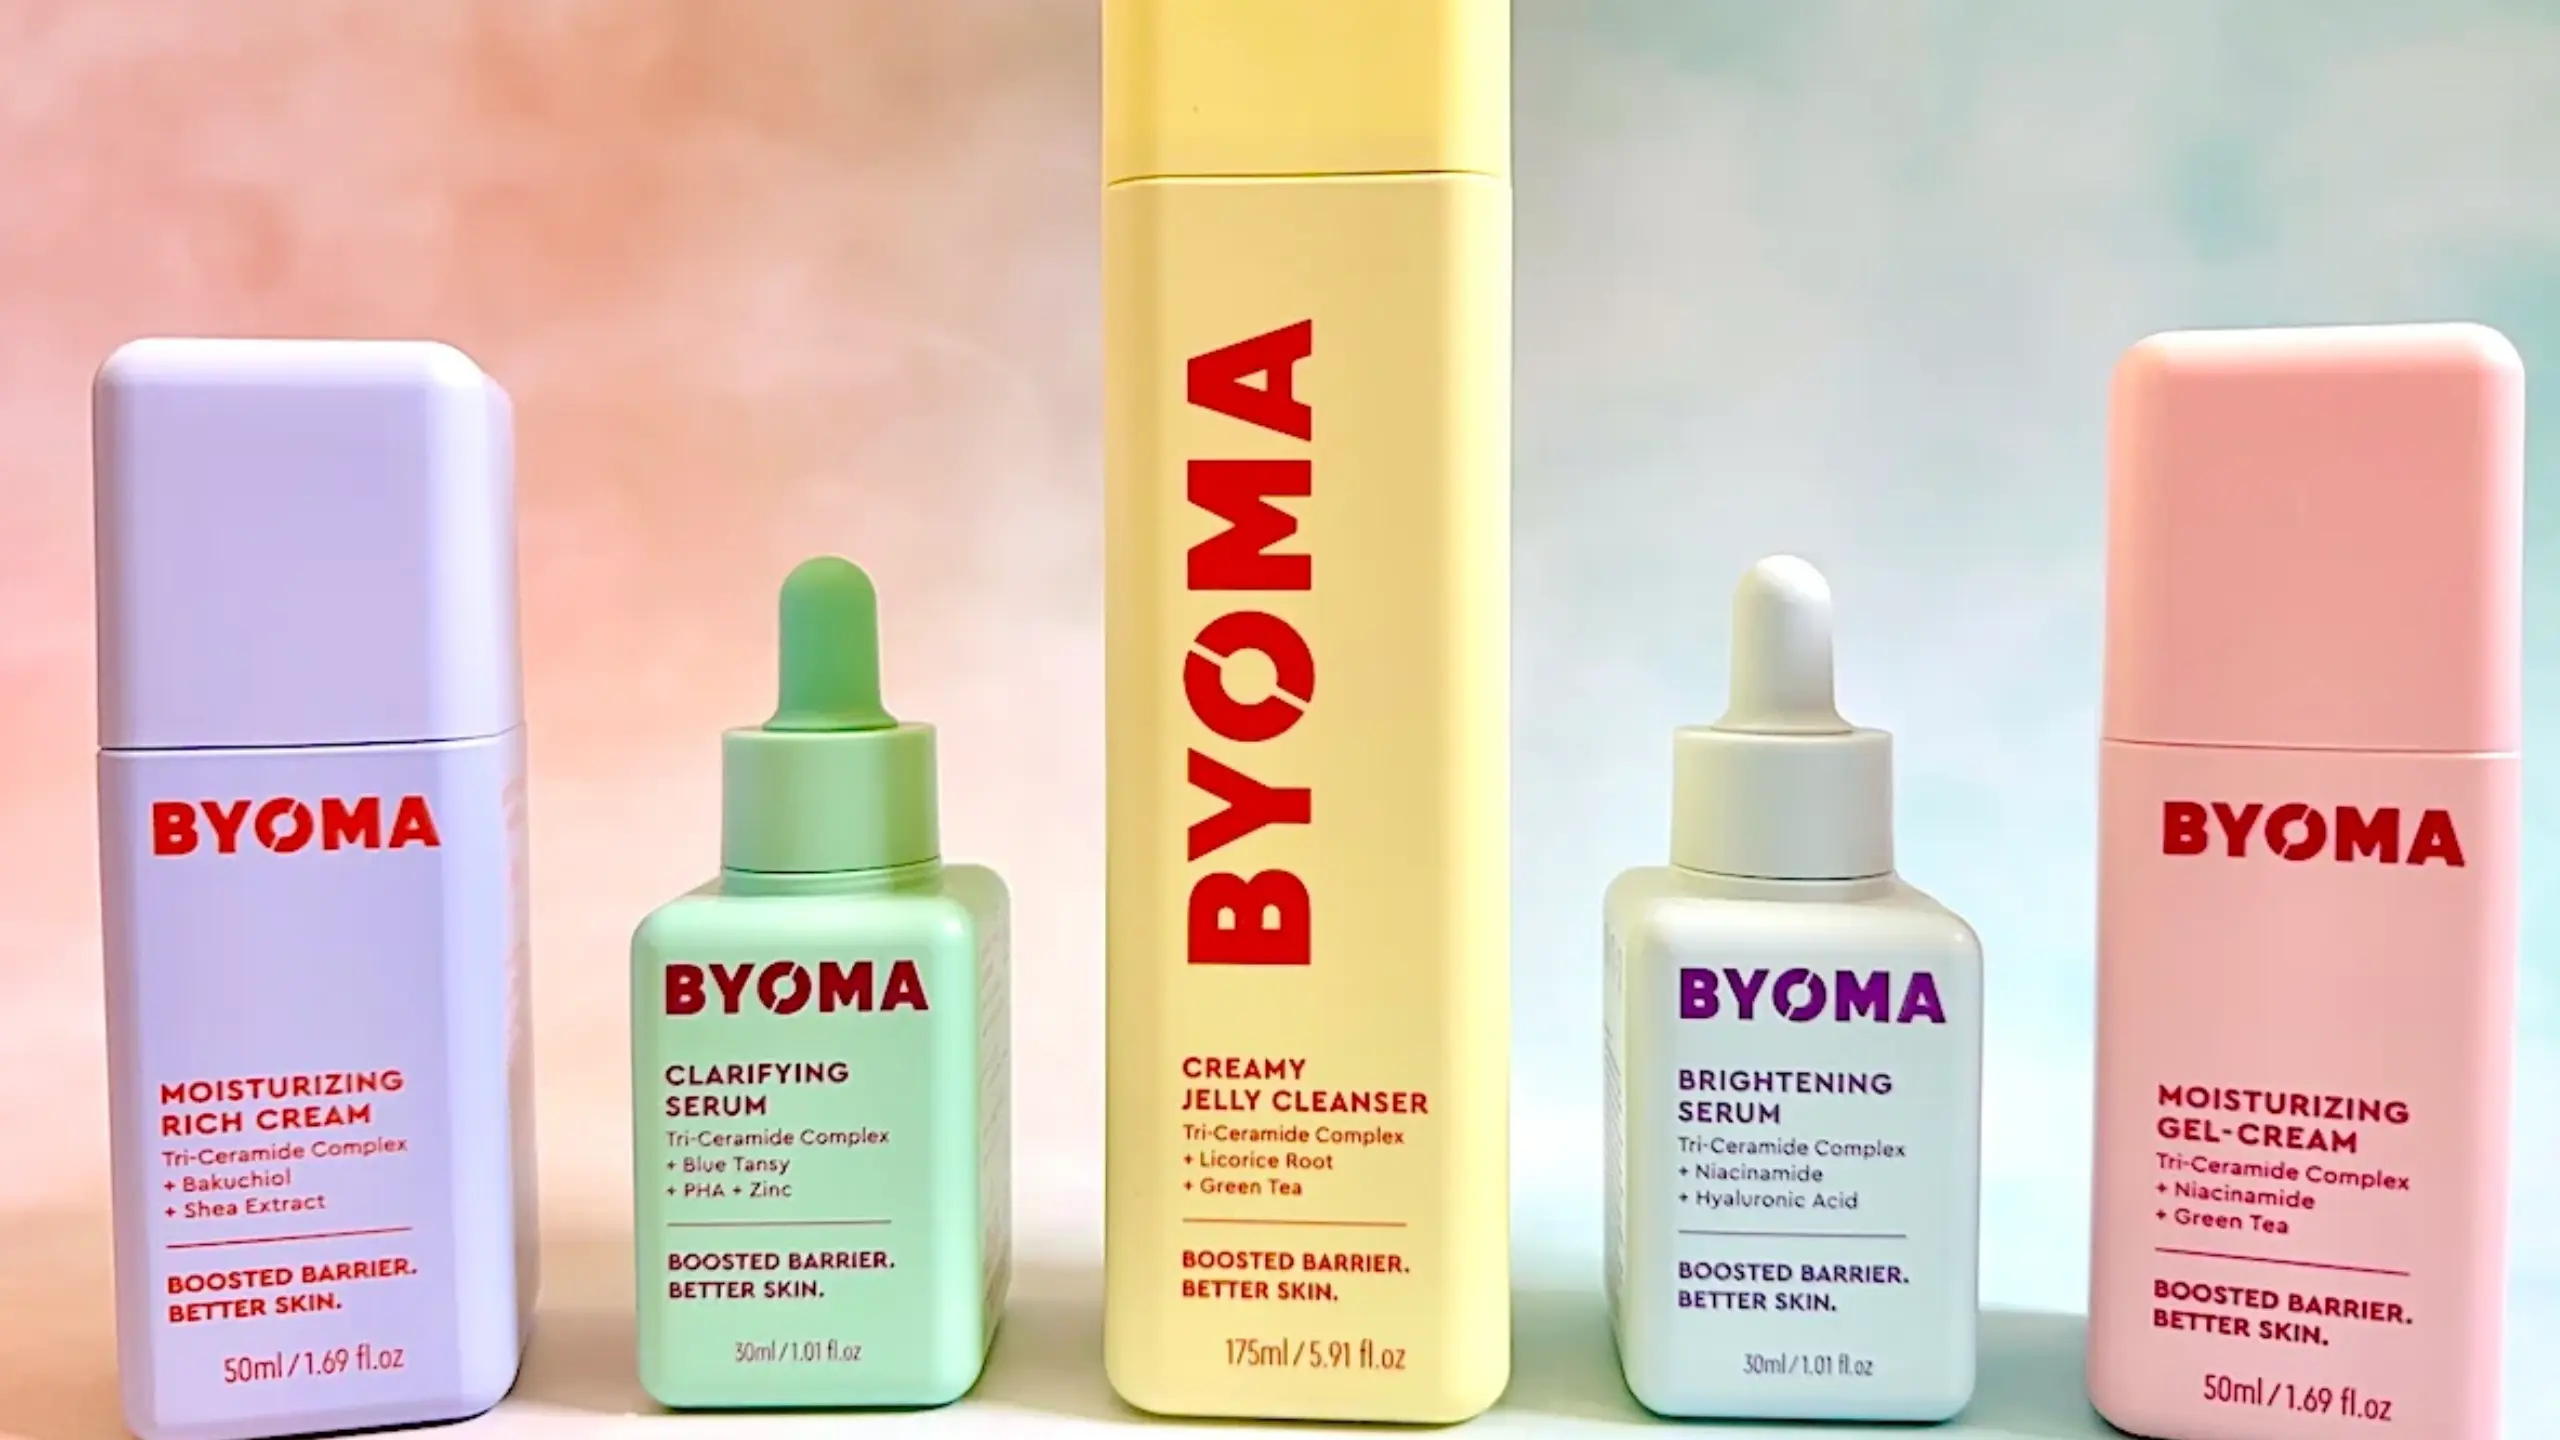 Byoma Skin Care:  Natural Beauty from Ancient Wisdom